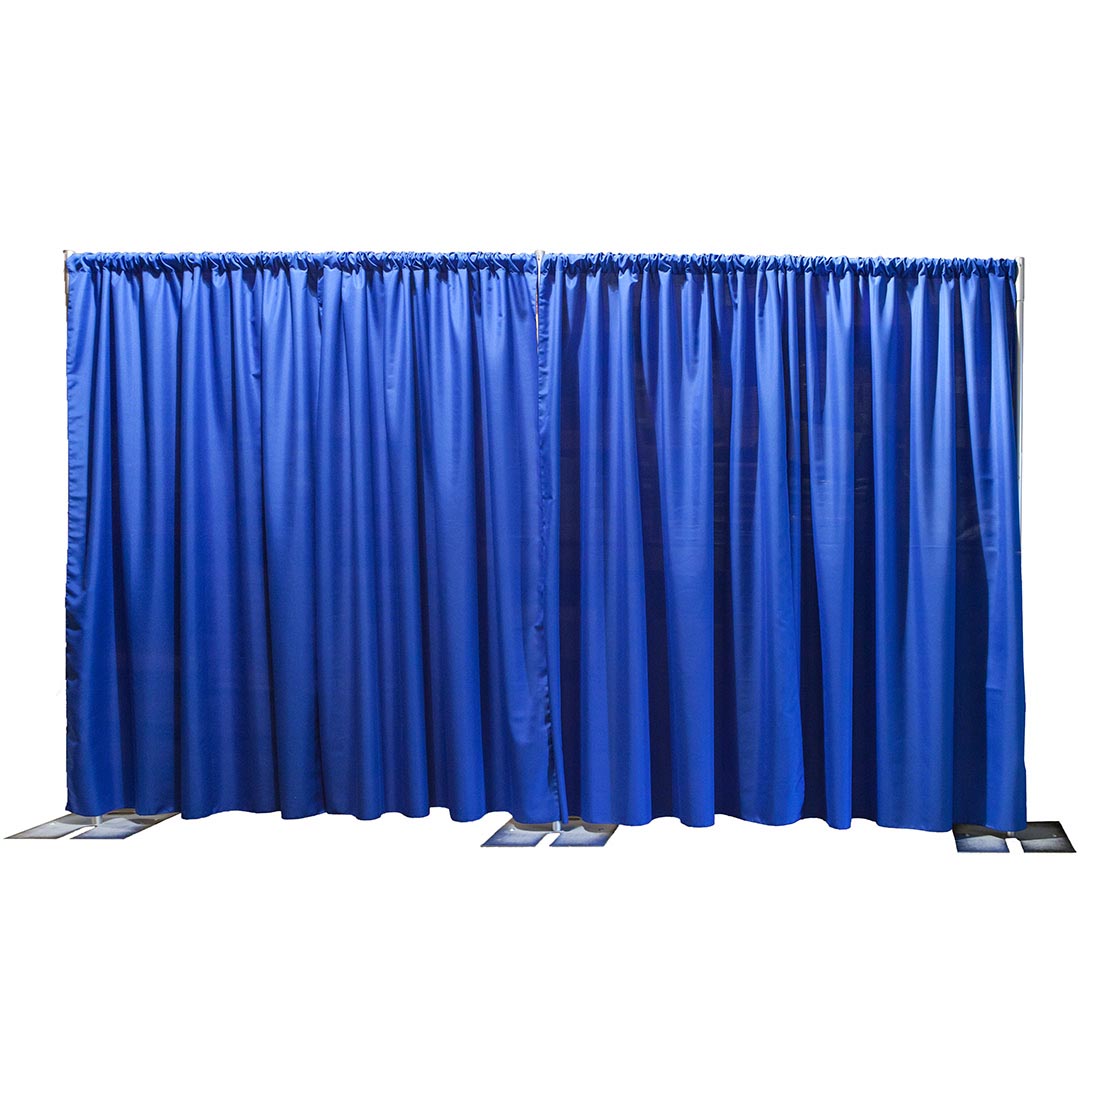 Adjustable Back Drop Curtain Wall Kit, 20 Ft Curtains